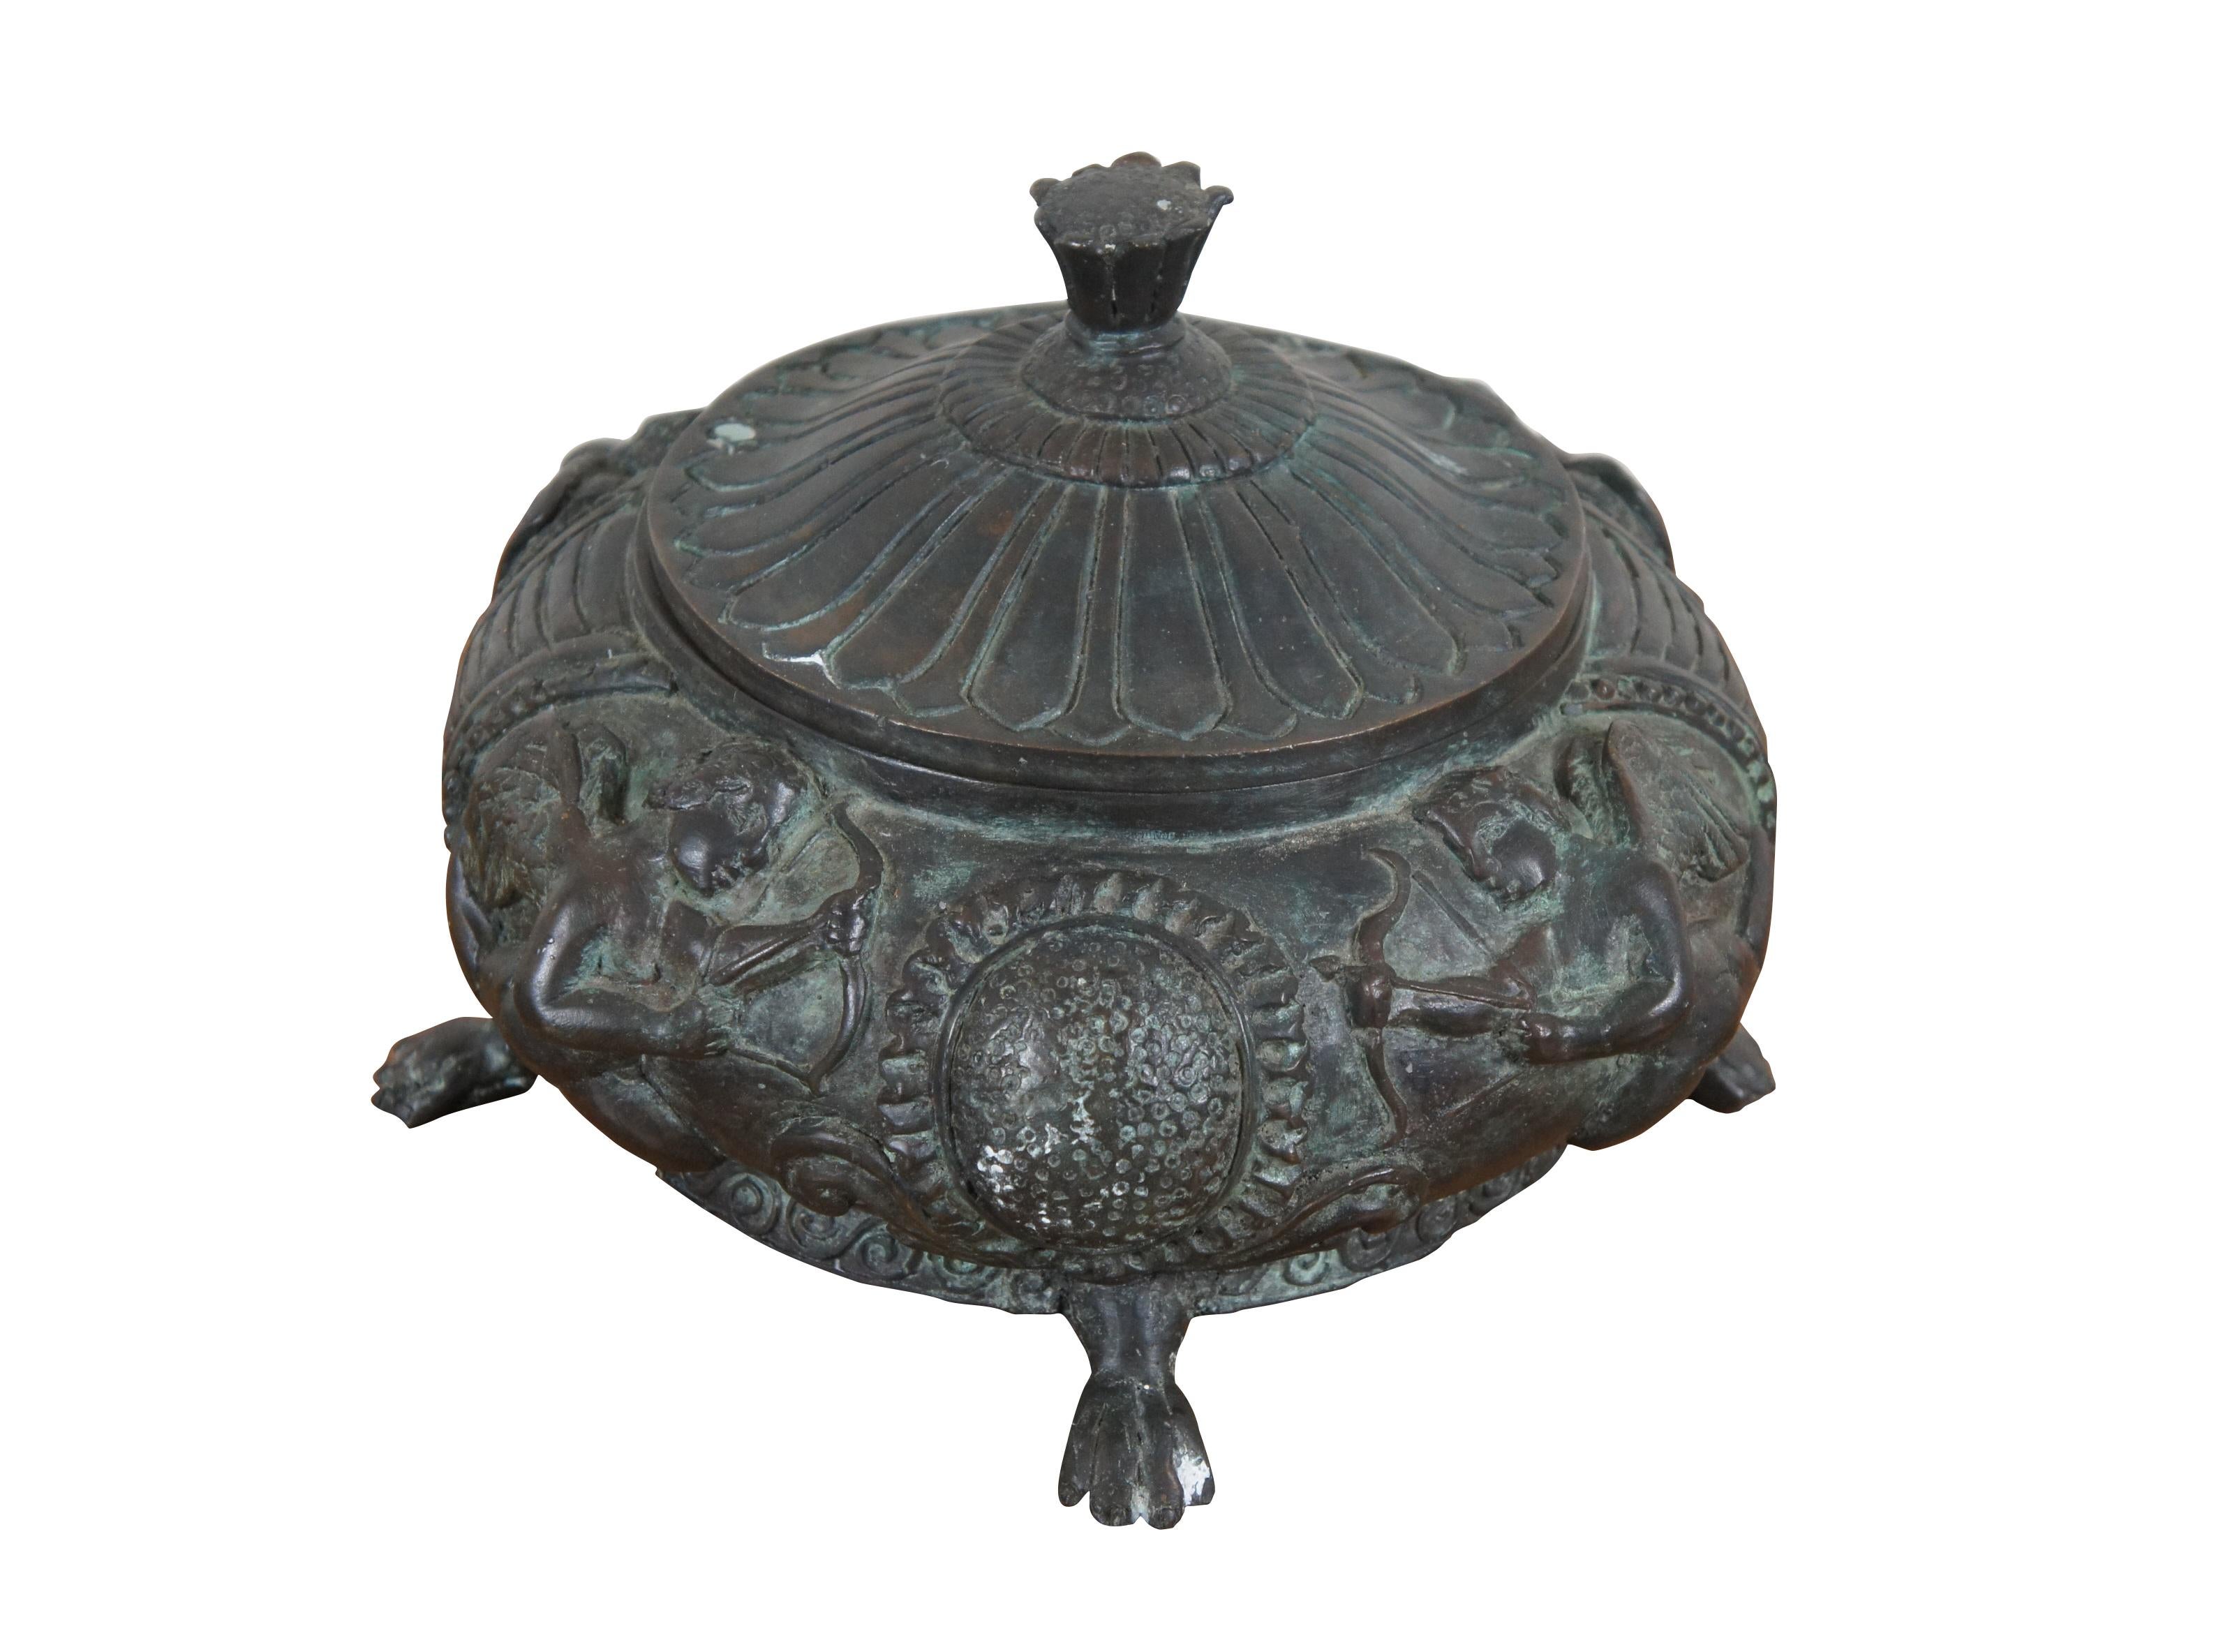 Rare vintage Maitland Smith bronze lidded and footed urn / compote featuring a low round form on paw feet, decorated with a Greek / Grecian design of cherubs in high relief, with a lid shaped like a sunflower.

Dimensions:
11.5